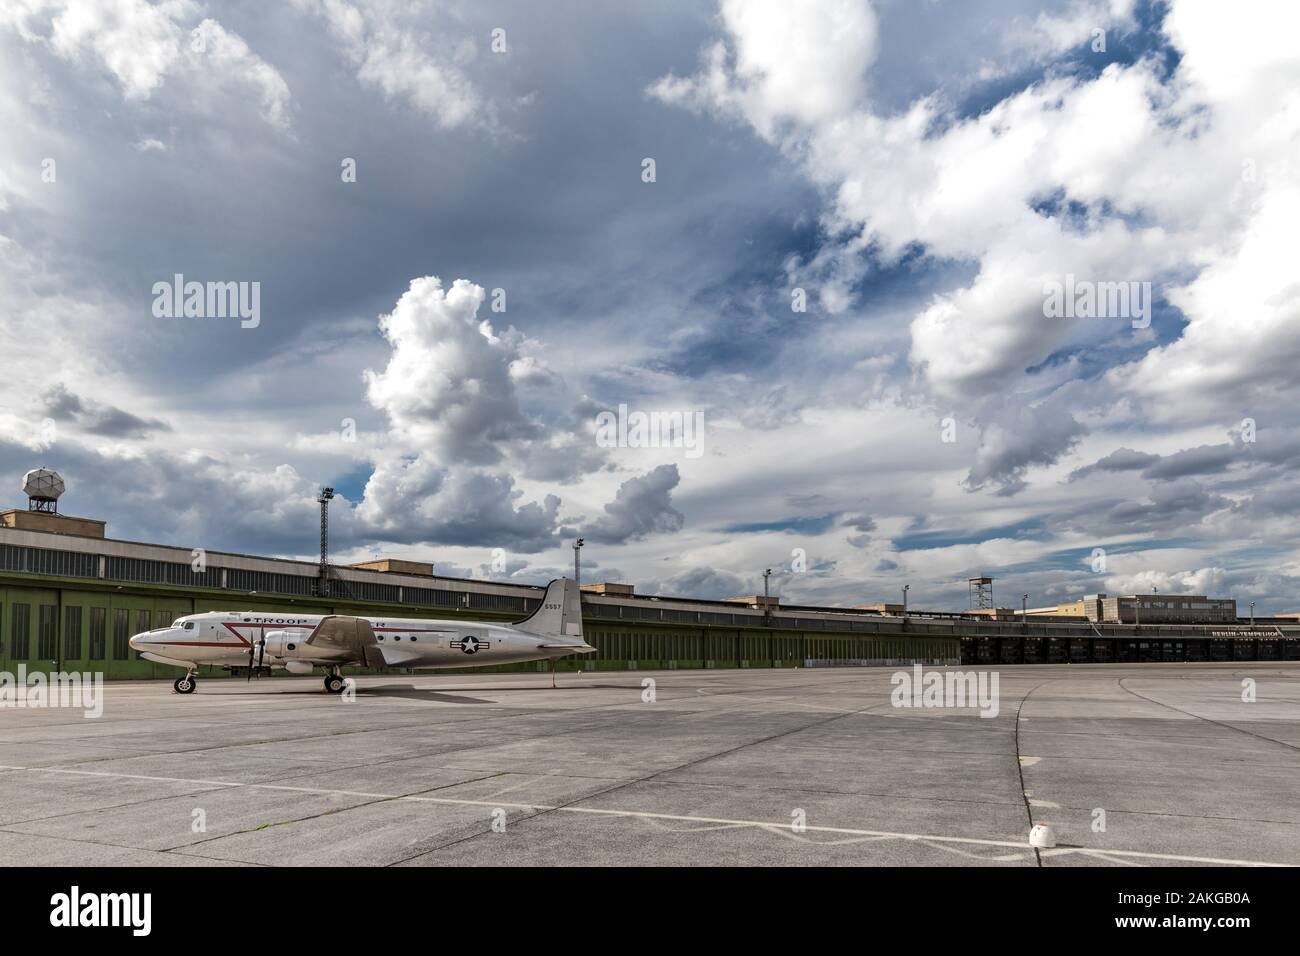 Wide angle view of the terminal of Tempelhof airport in Berlin, under a stormy sky and with a decommissioned USAF DC4 in the foreground Stock Photo